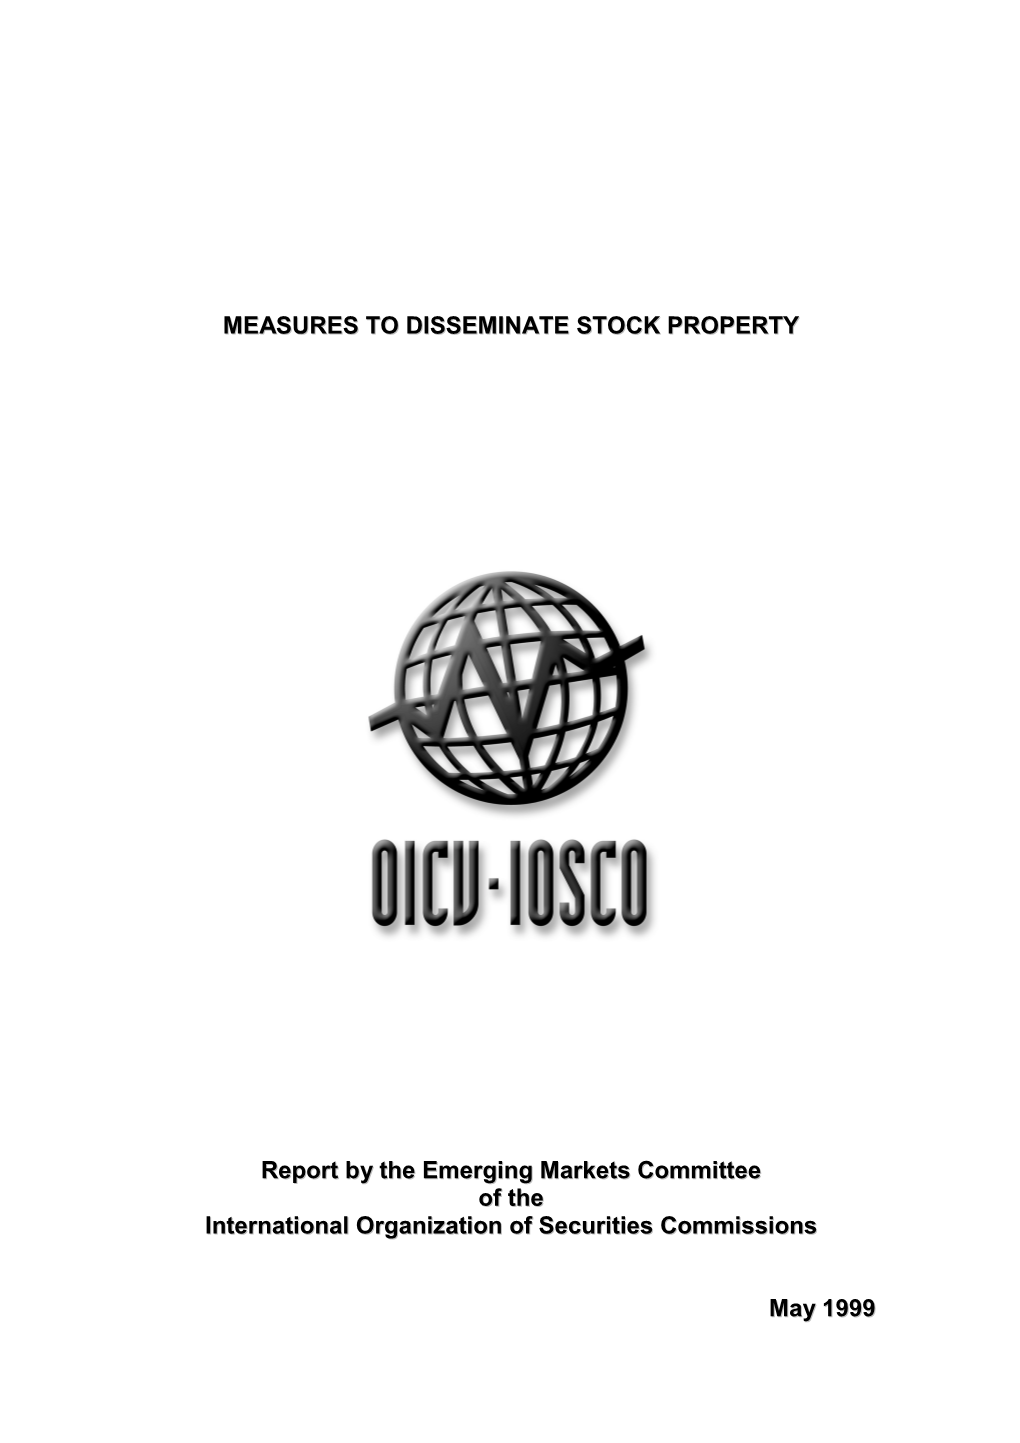 Measures to Disseminate Stock Property